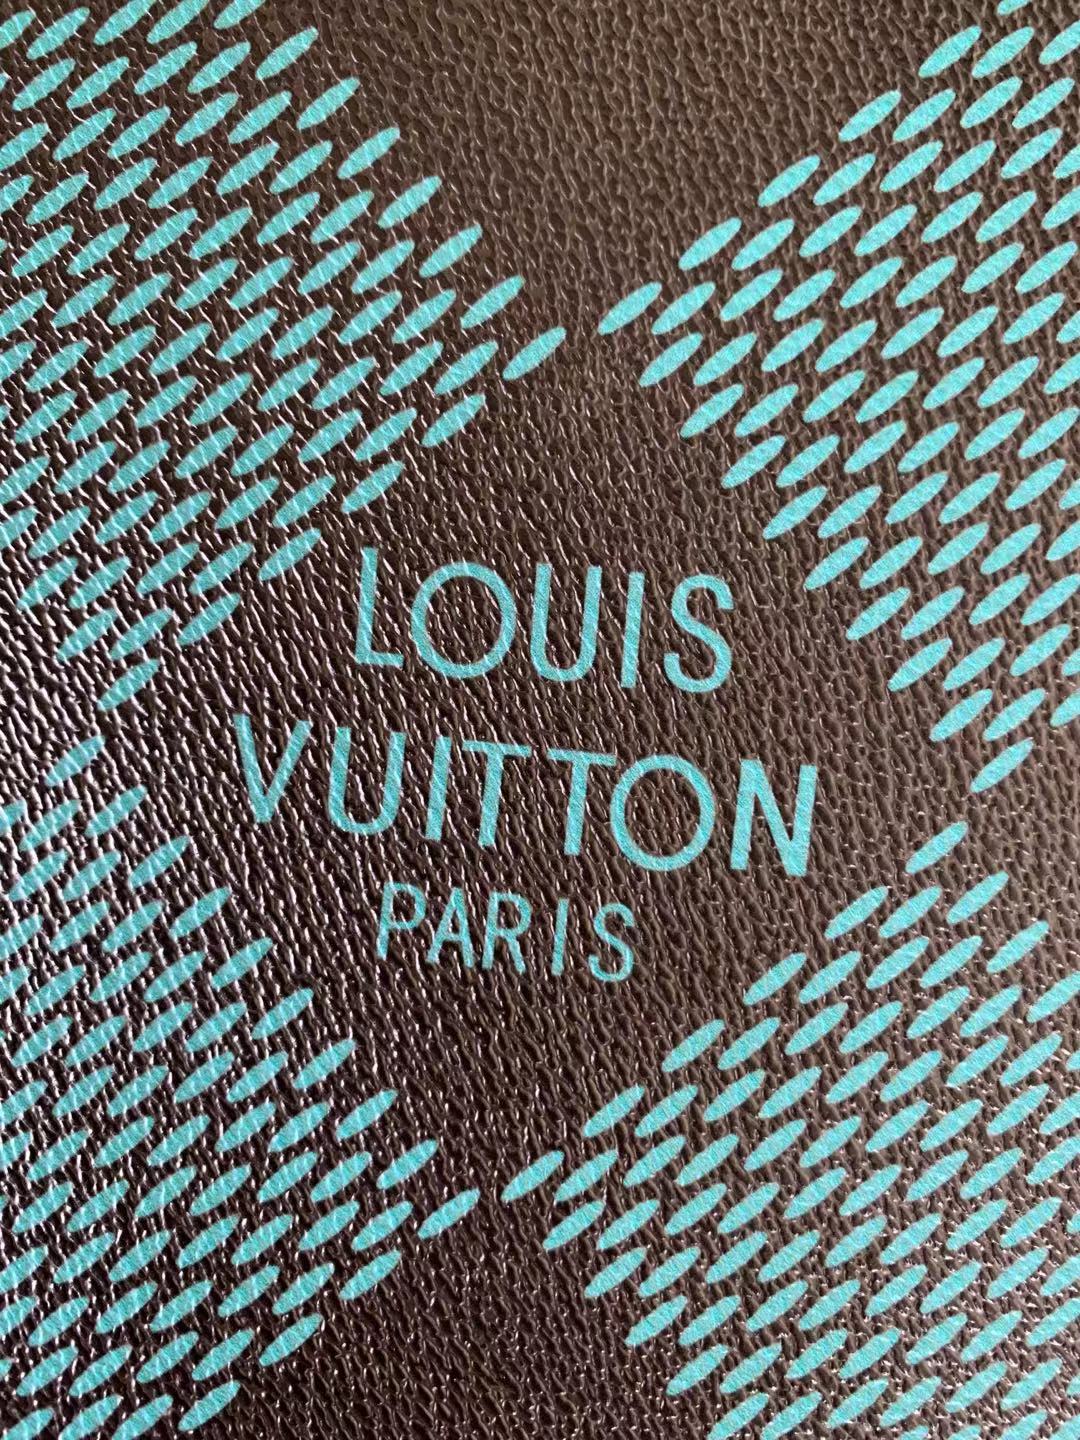 Classic Louis Vuitton Leather Case Fabric, 2.5 inch Big Size Gird Handmade Leather Fabric, Handmade Shoes and Bags Leather By Yard ( Atrovirens )